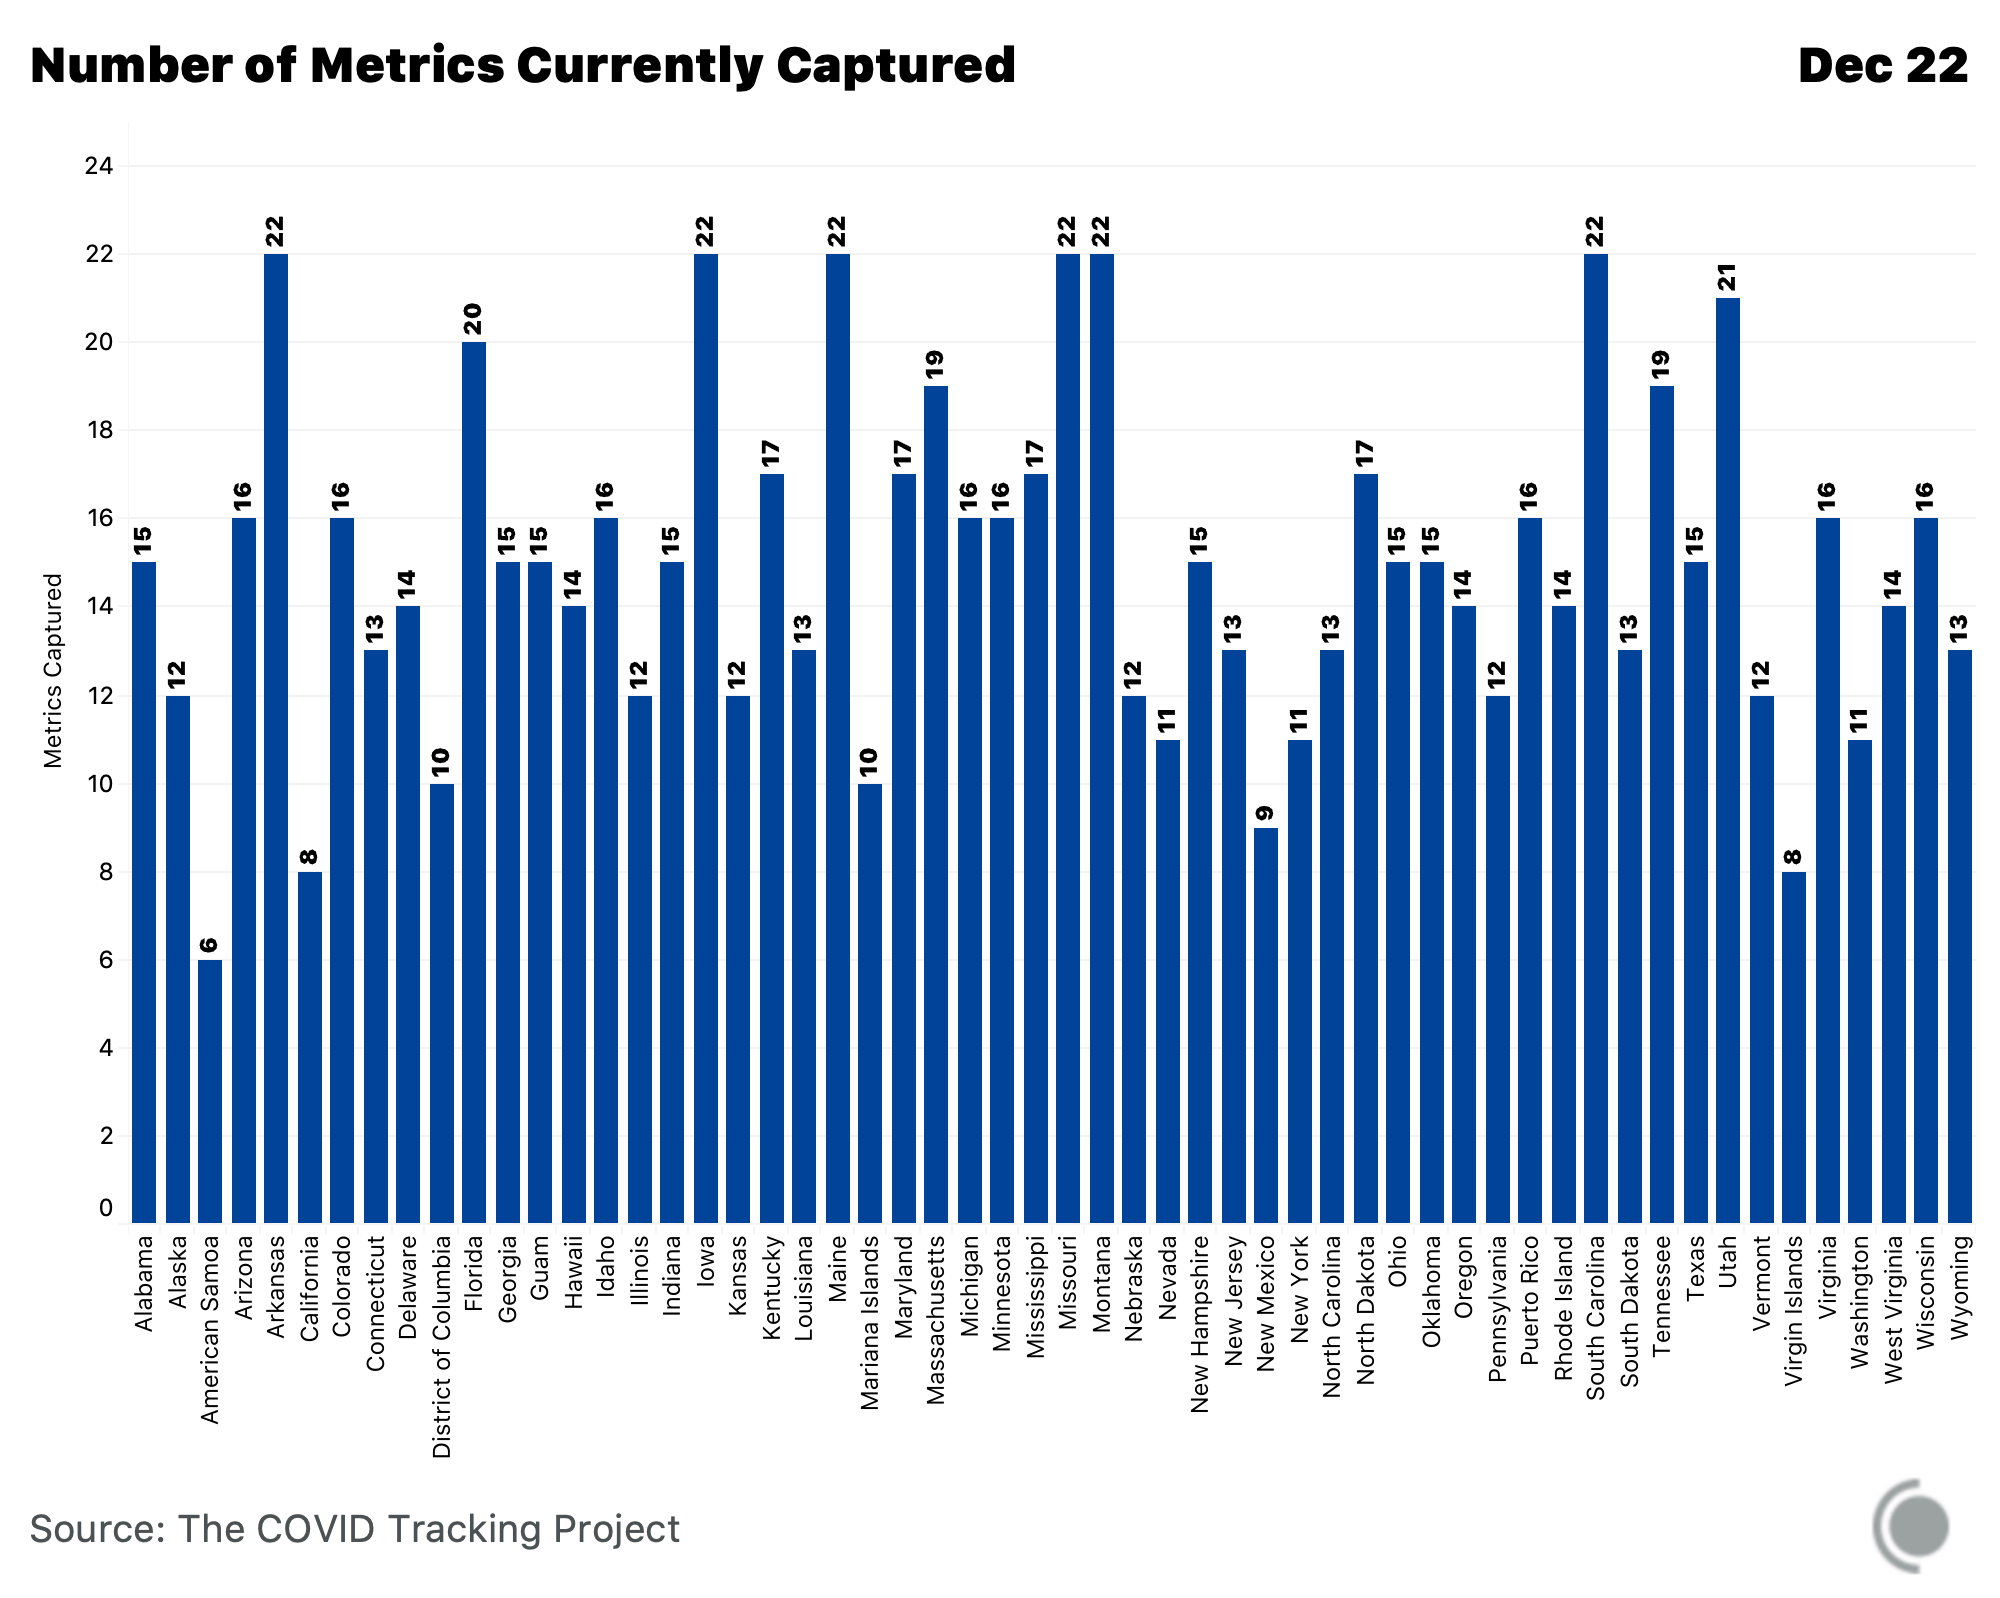 A bar chart displaying the number of COVID-19 metrics captured by The COVID Tracking Project. Arkansas is the highest number at 22 and American Samoa is the lowest number at 6.